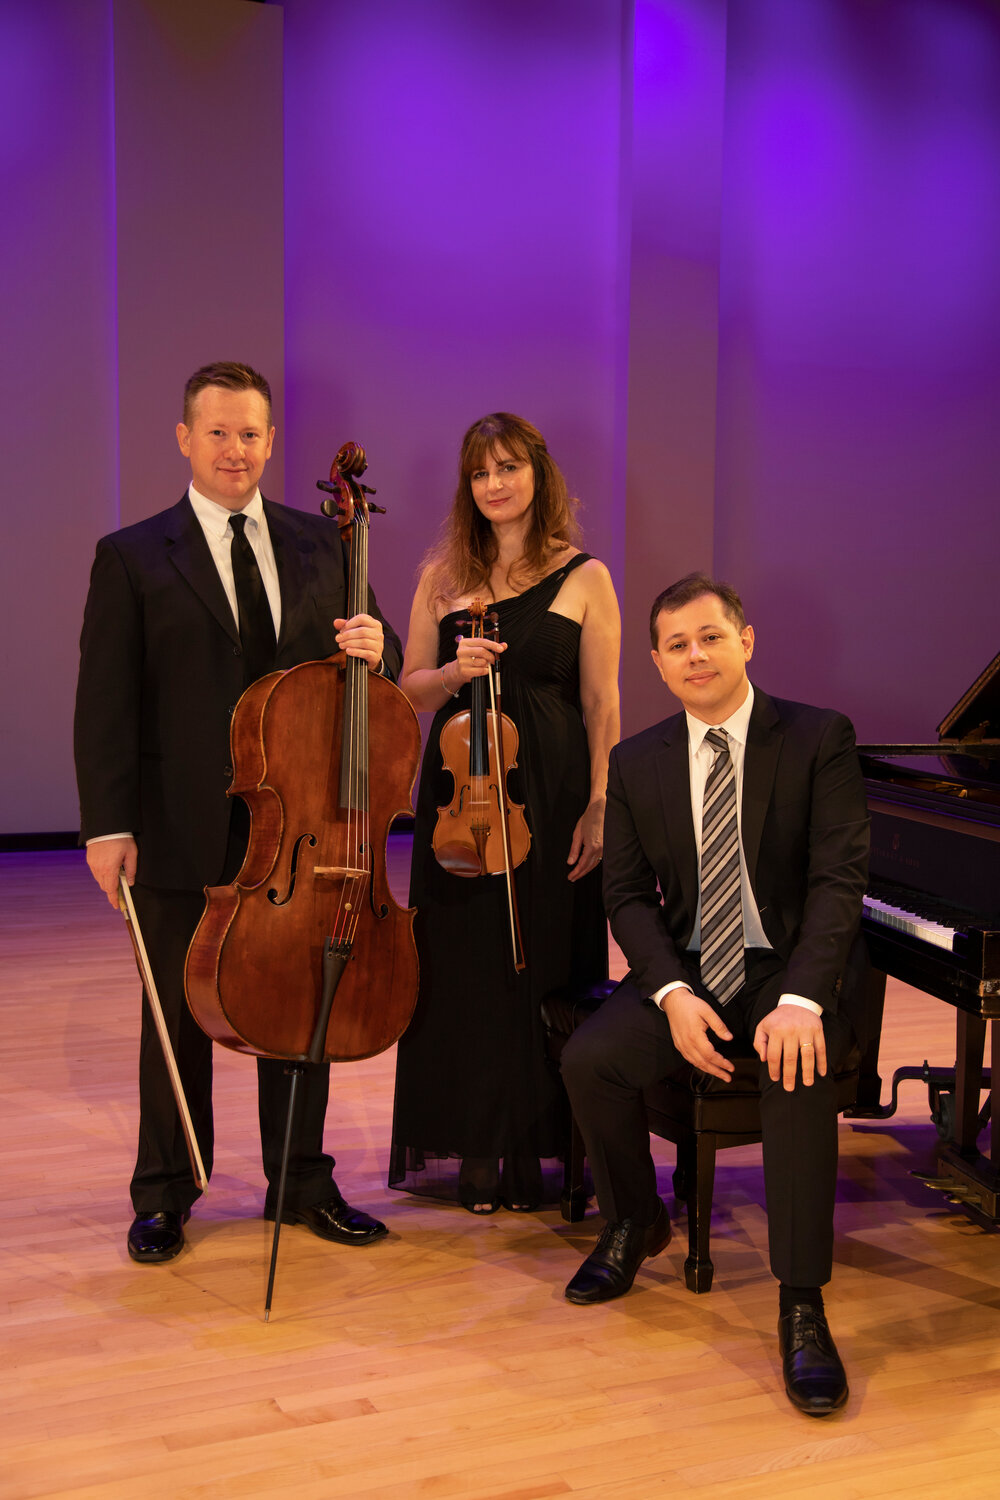 The Puget Sound Piano Trio will perform in Princeton, N.J., on April 24.